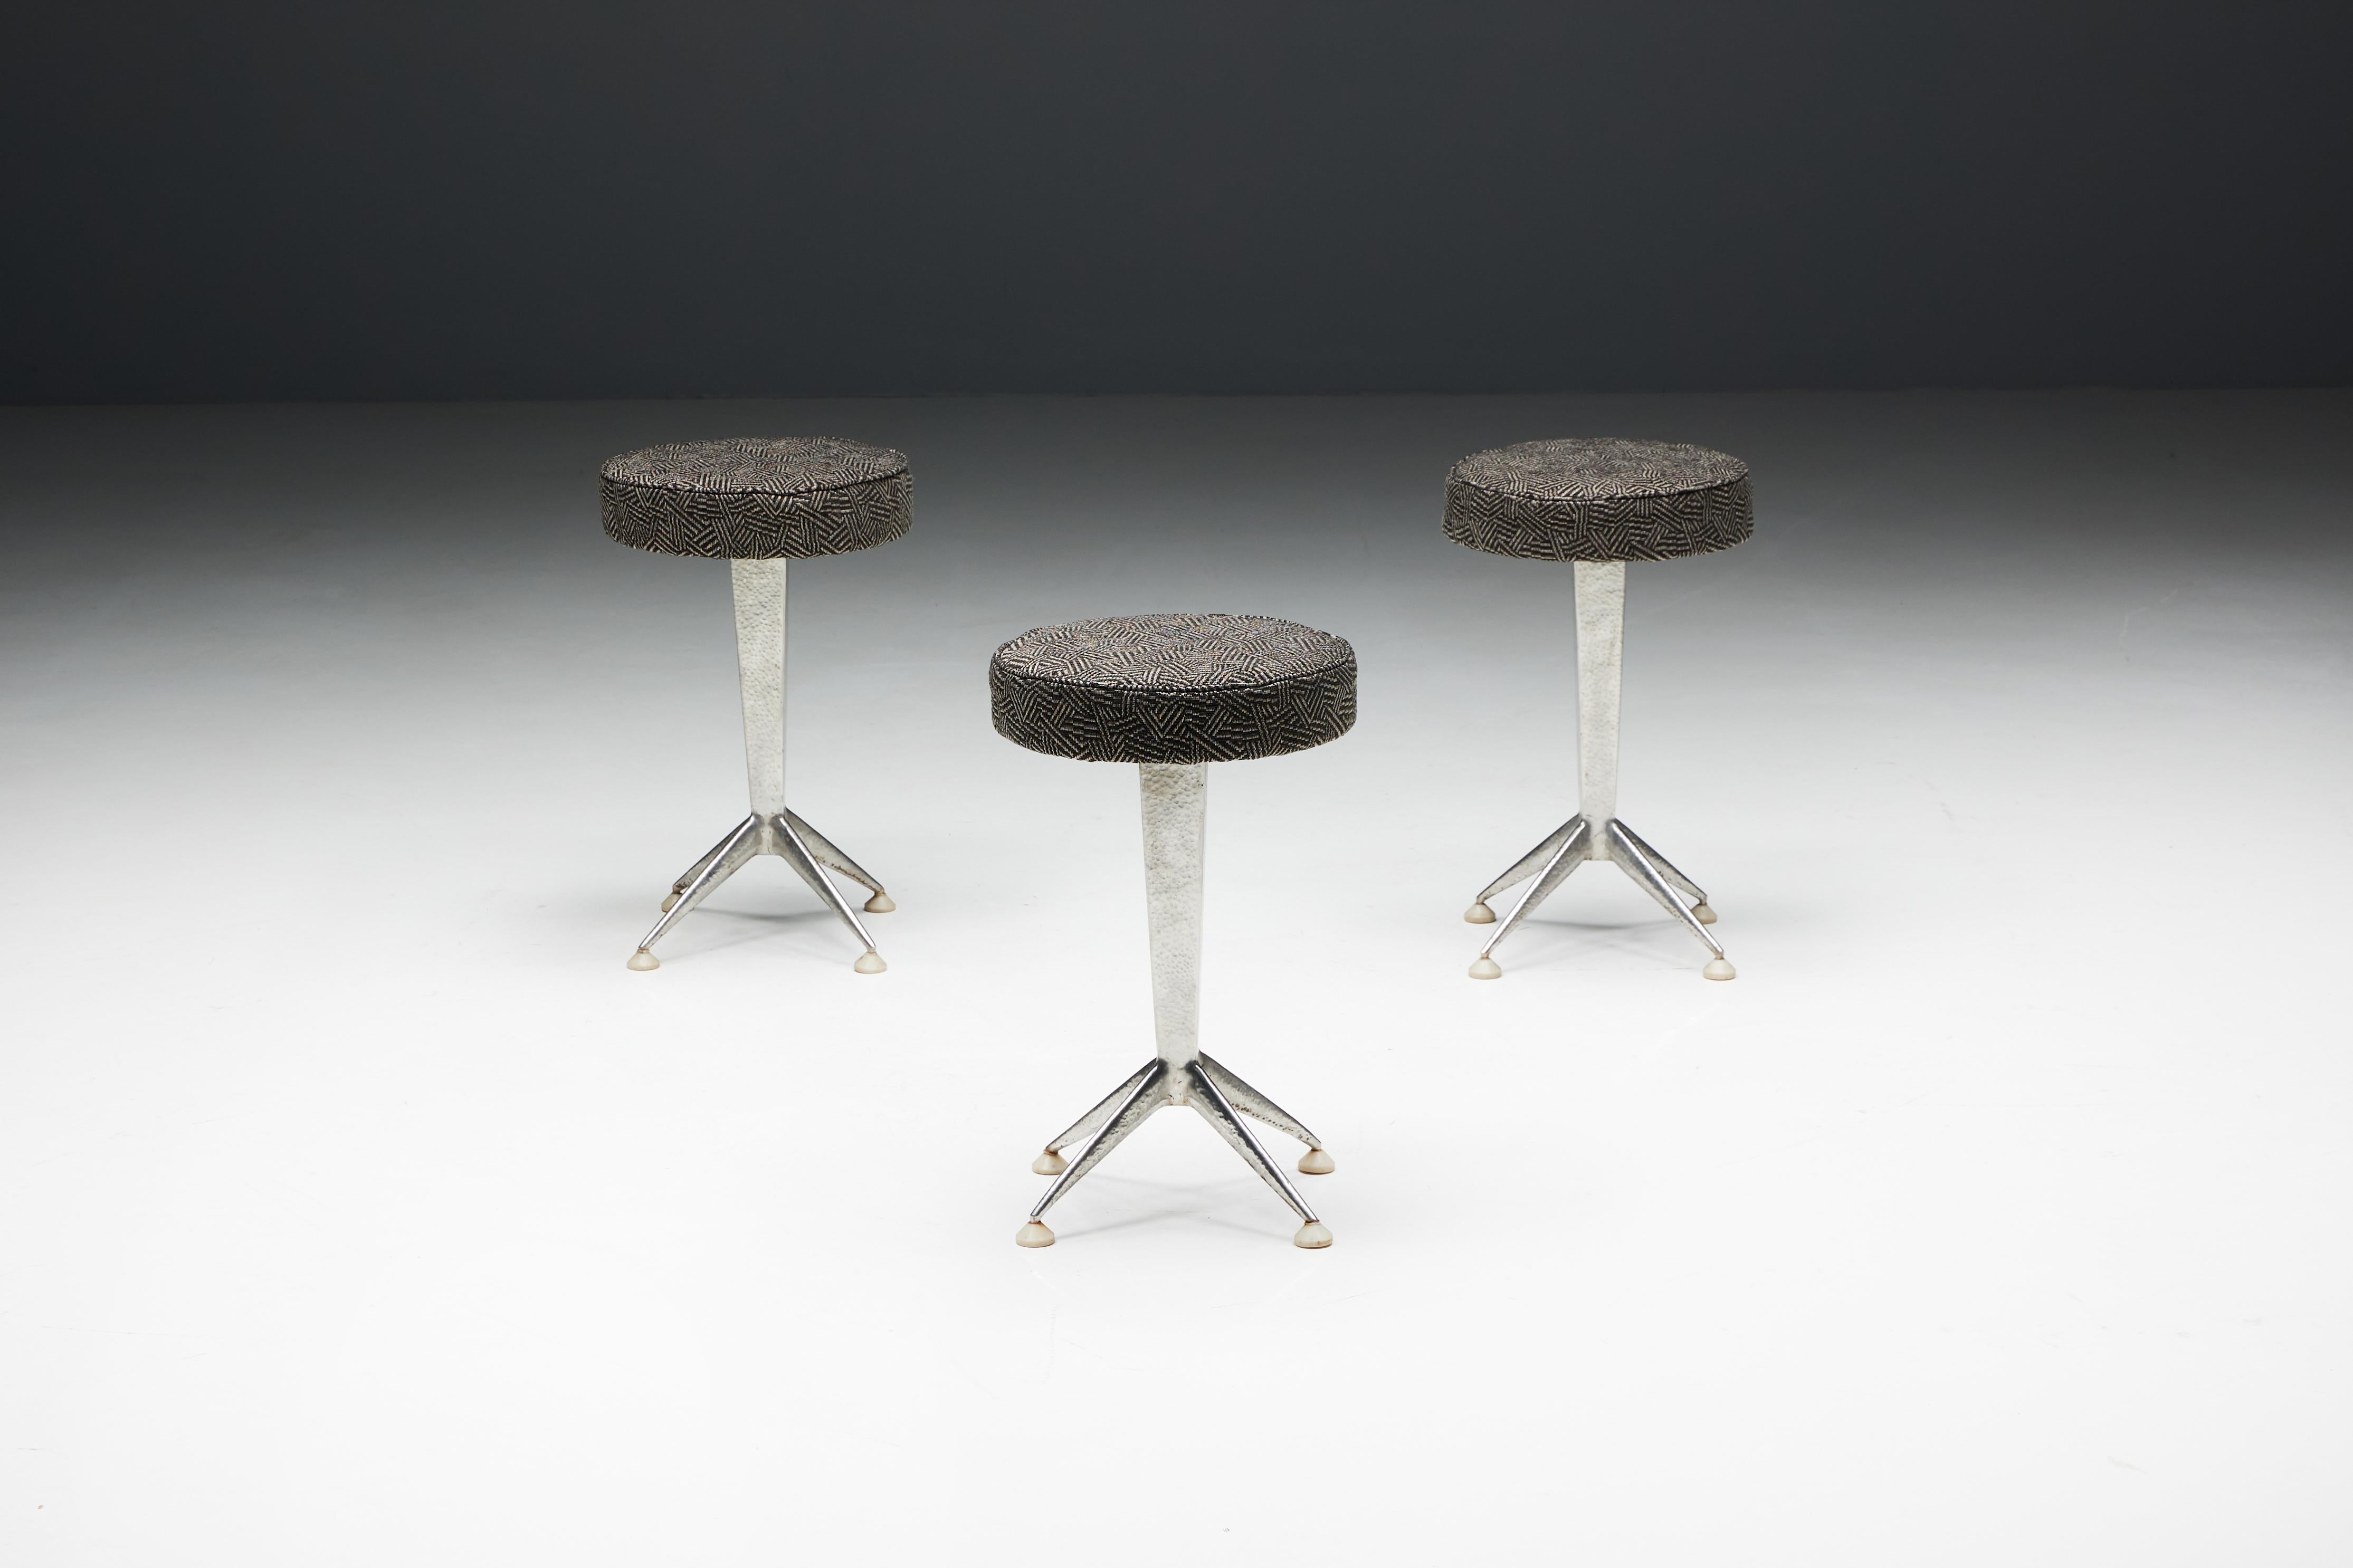 Hammered steel bar stools, inspired by the sleek lines and geometric patterns of Art Deco design. These stools feature round fabric seating in an Art Deco print atop hammered steel legs, embodying the sophistication and glamour reminiscent of the